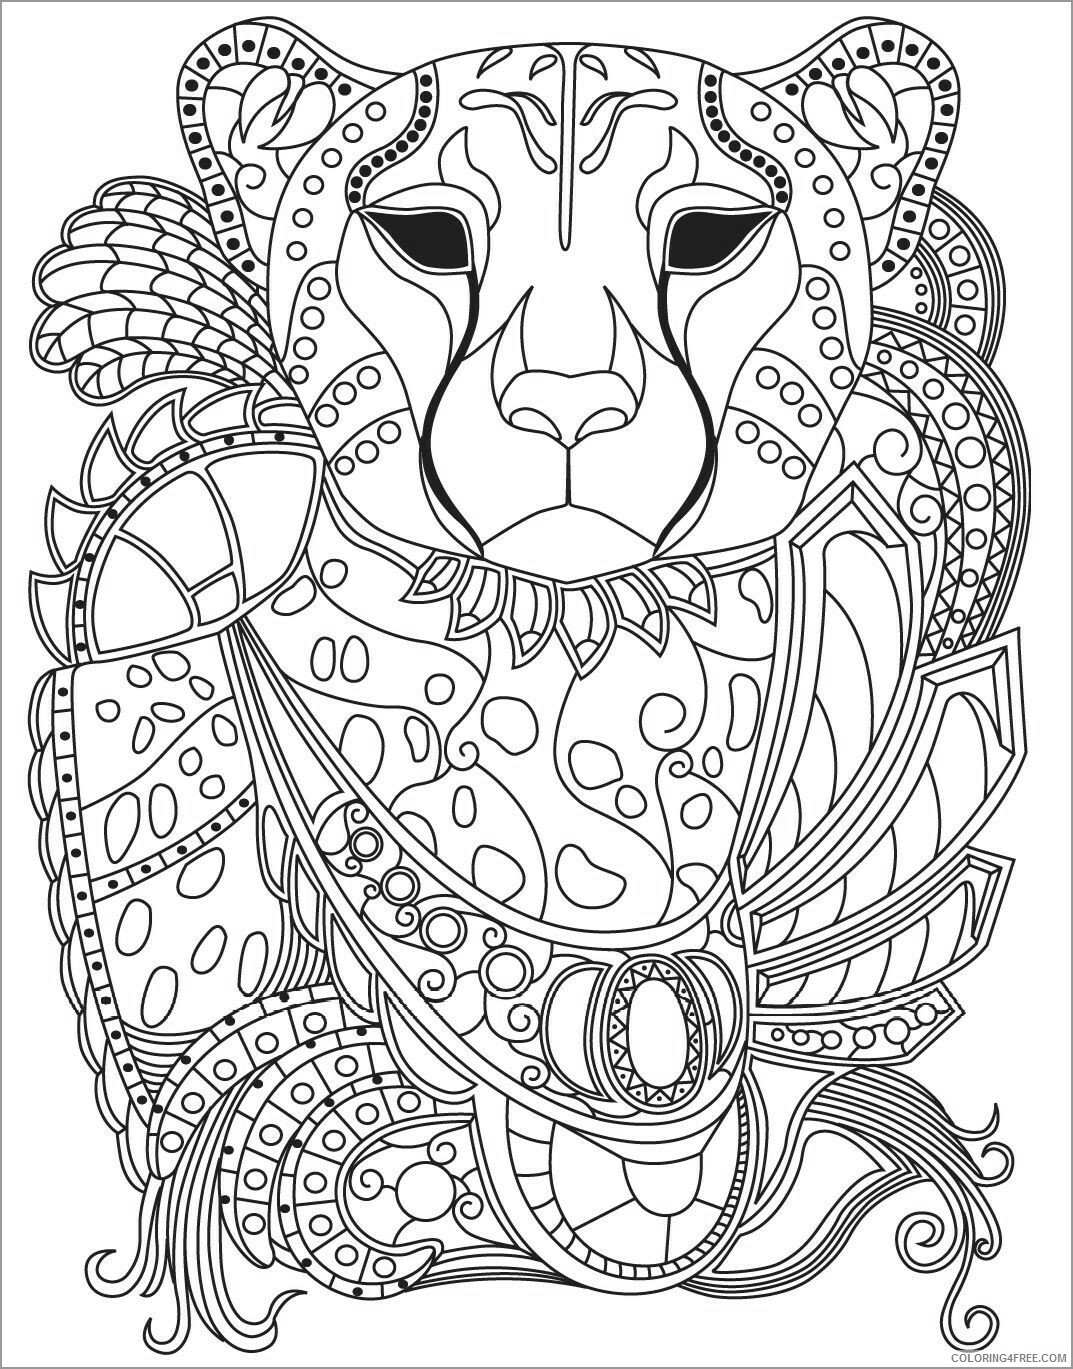 Leopard Coloring Pages Animal Printable Sheets mandala leopard 2021 3144 Coloring4free